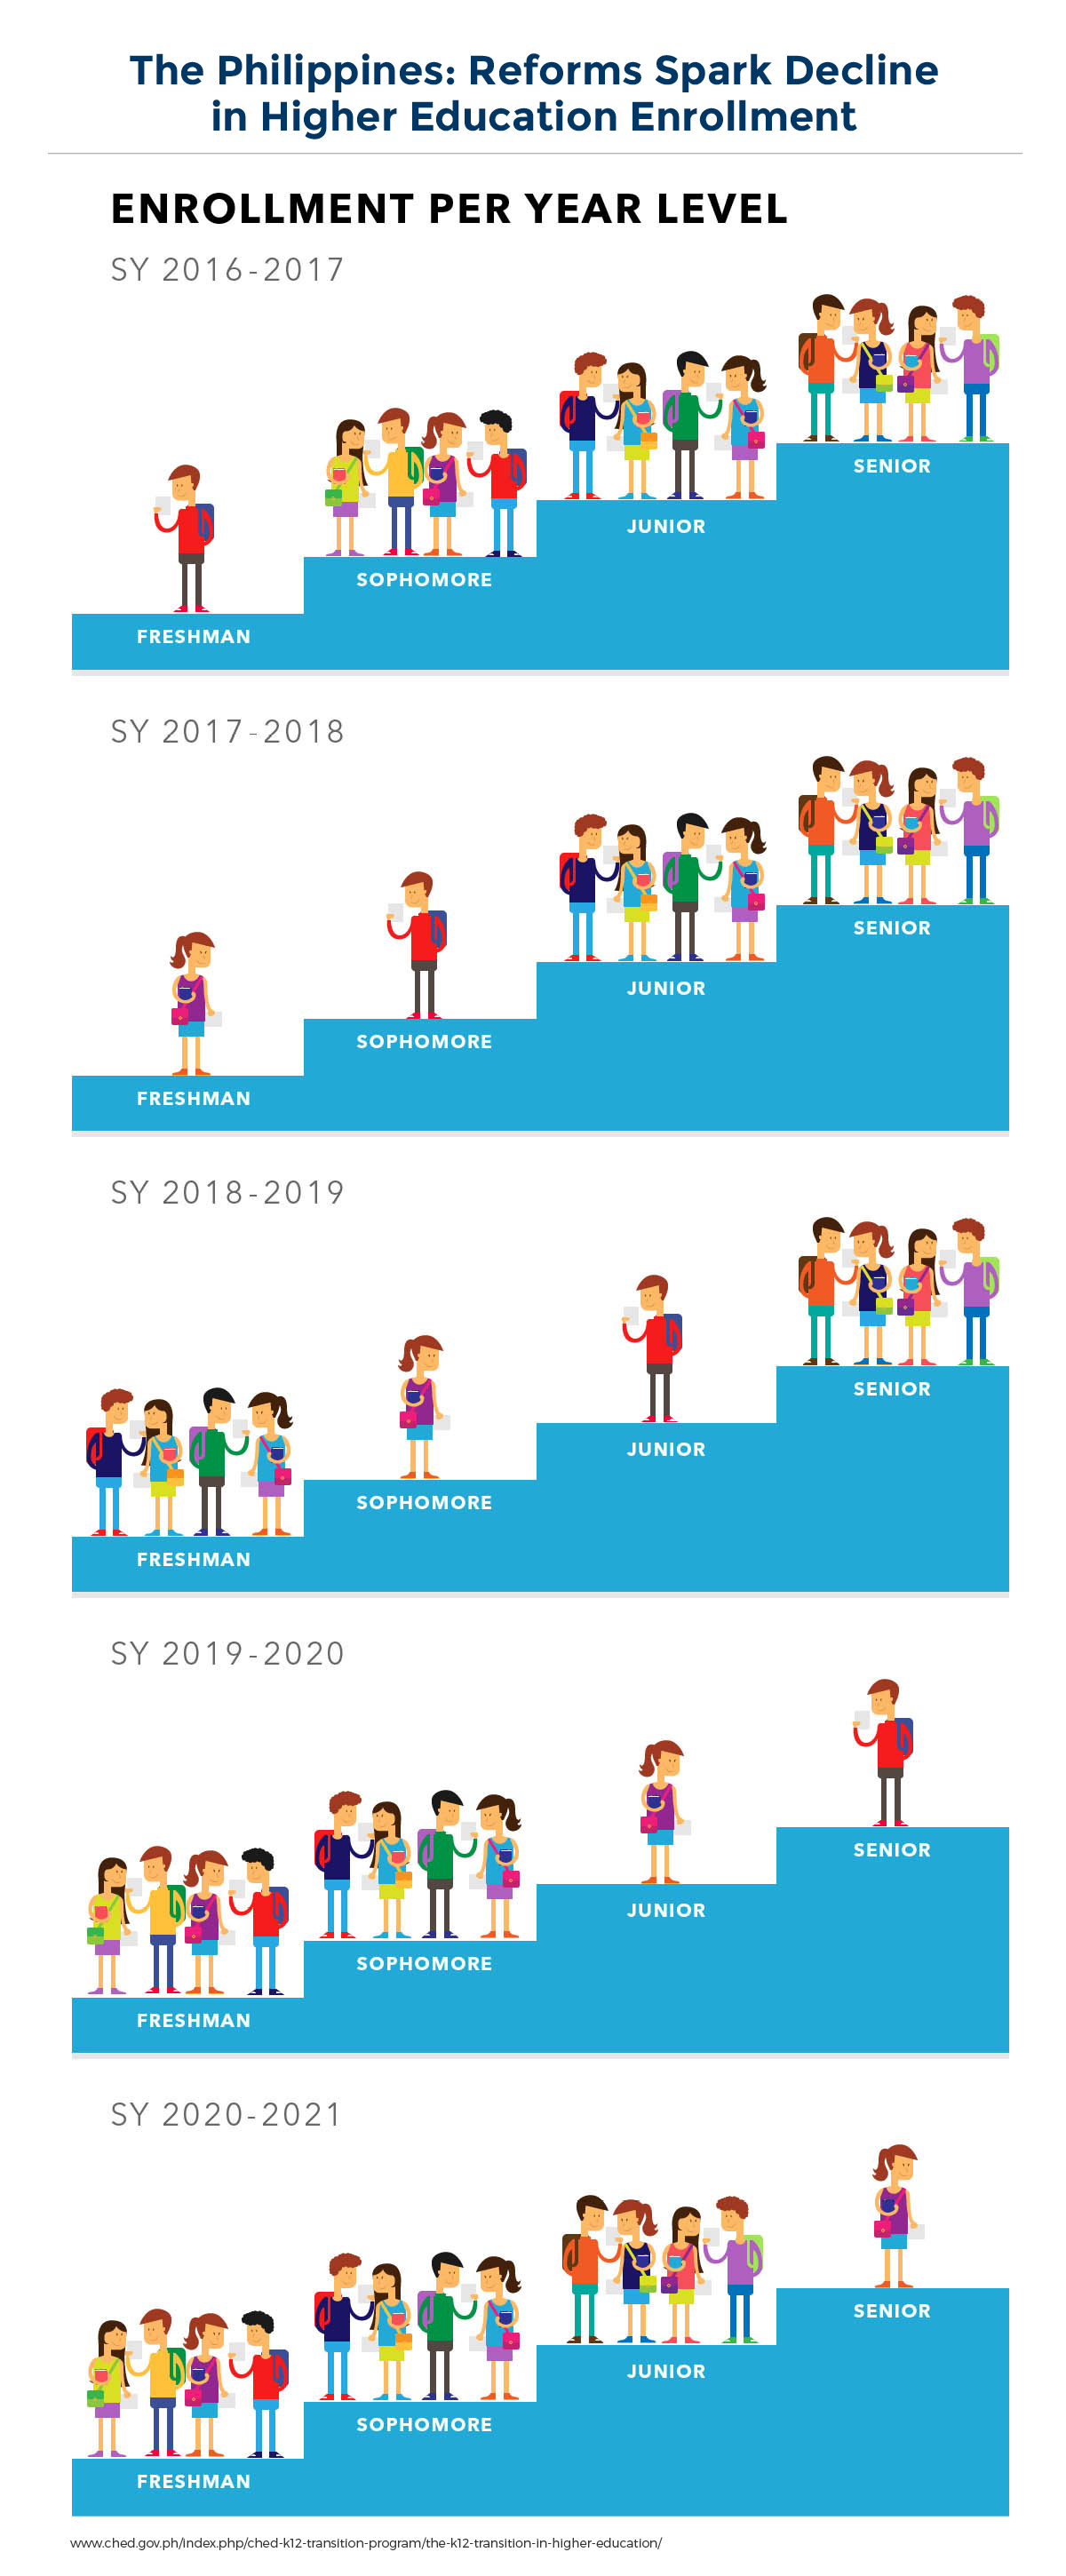 An infographic showing the impact of the K-12 reforms on higher education enrollment between 2017/18 and 2021/22